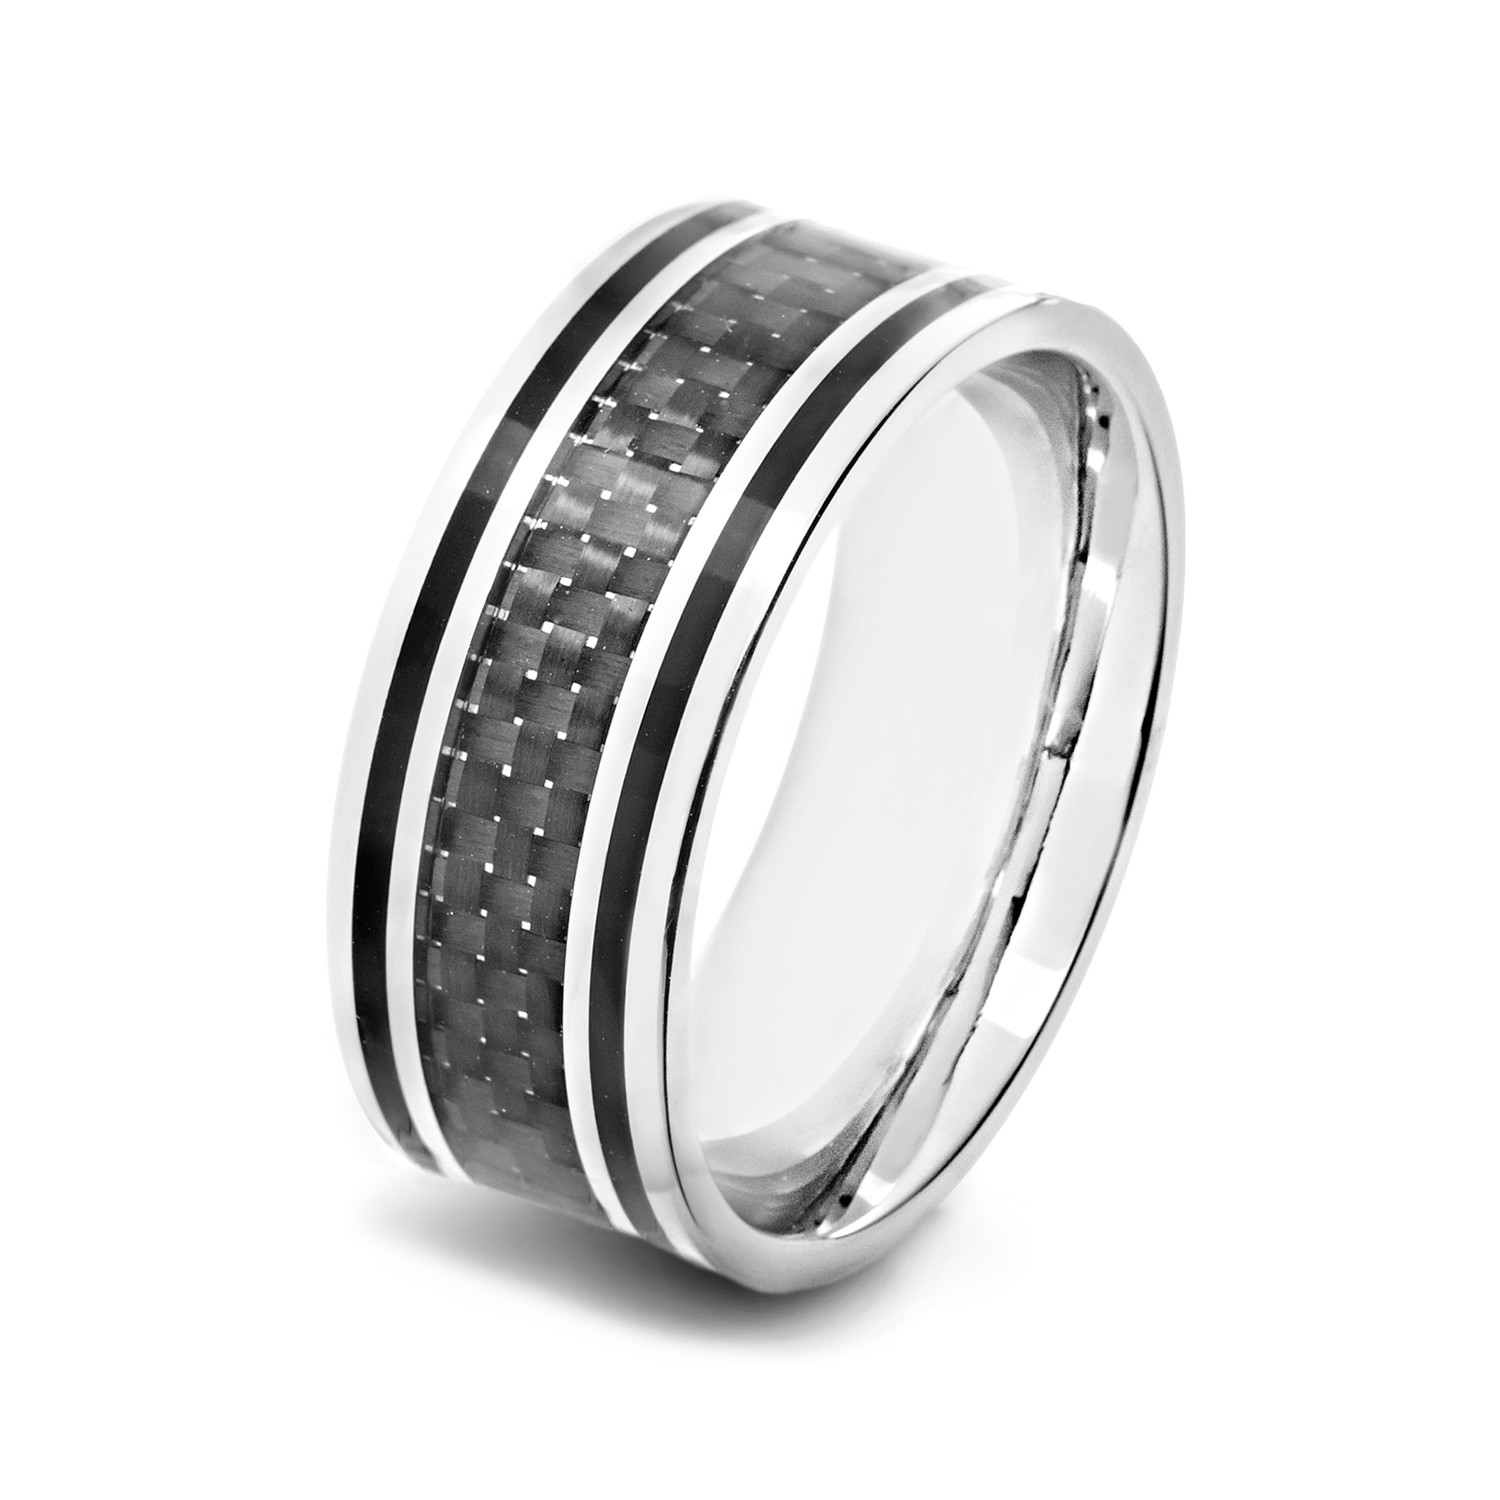 Crucible Stainless Steel Black Carbon Fiber Inlay Ring (Size 8